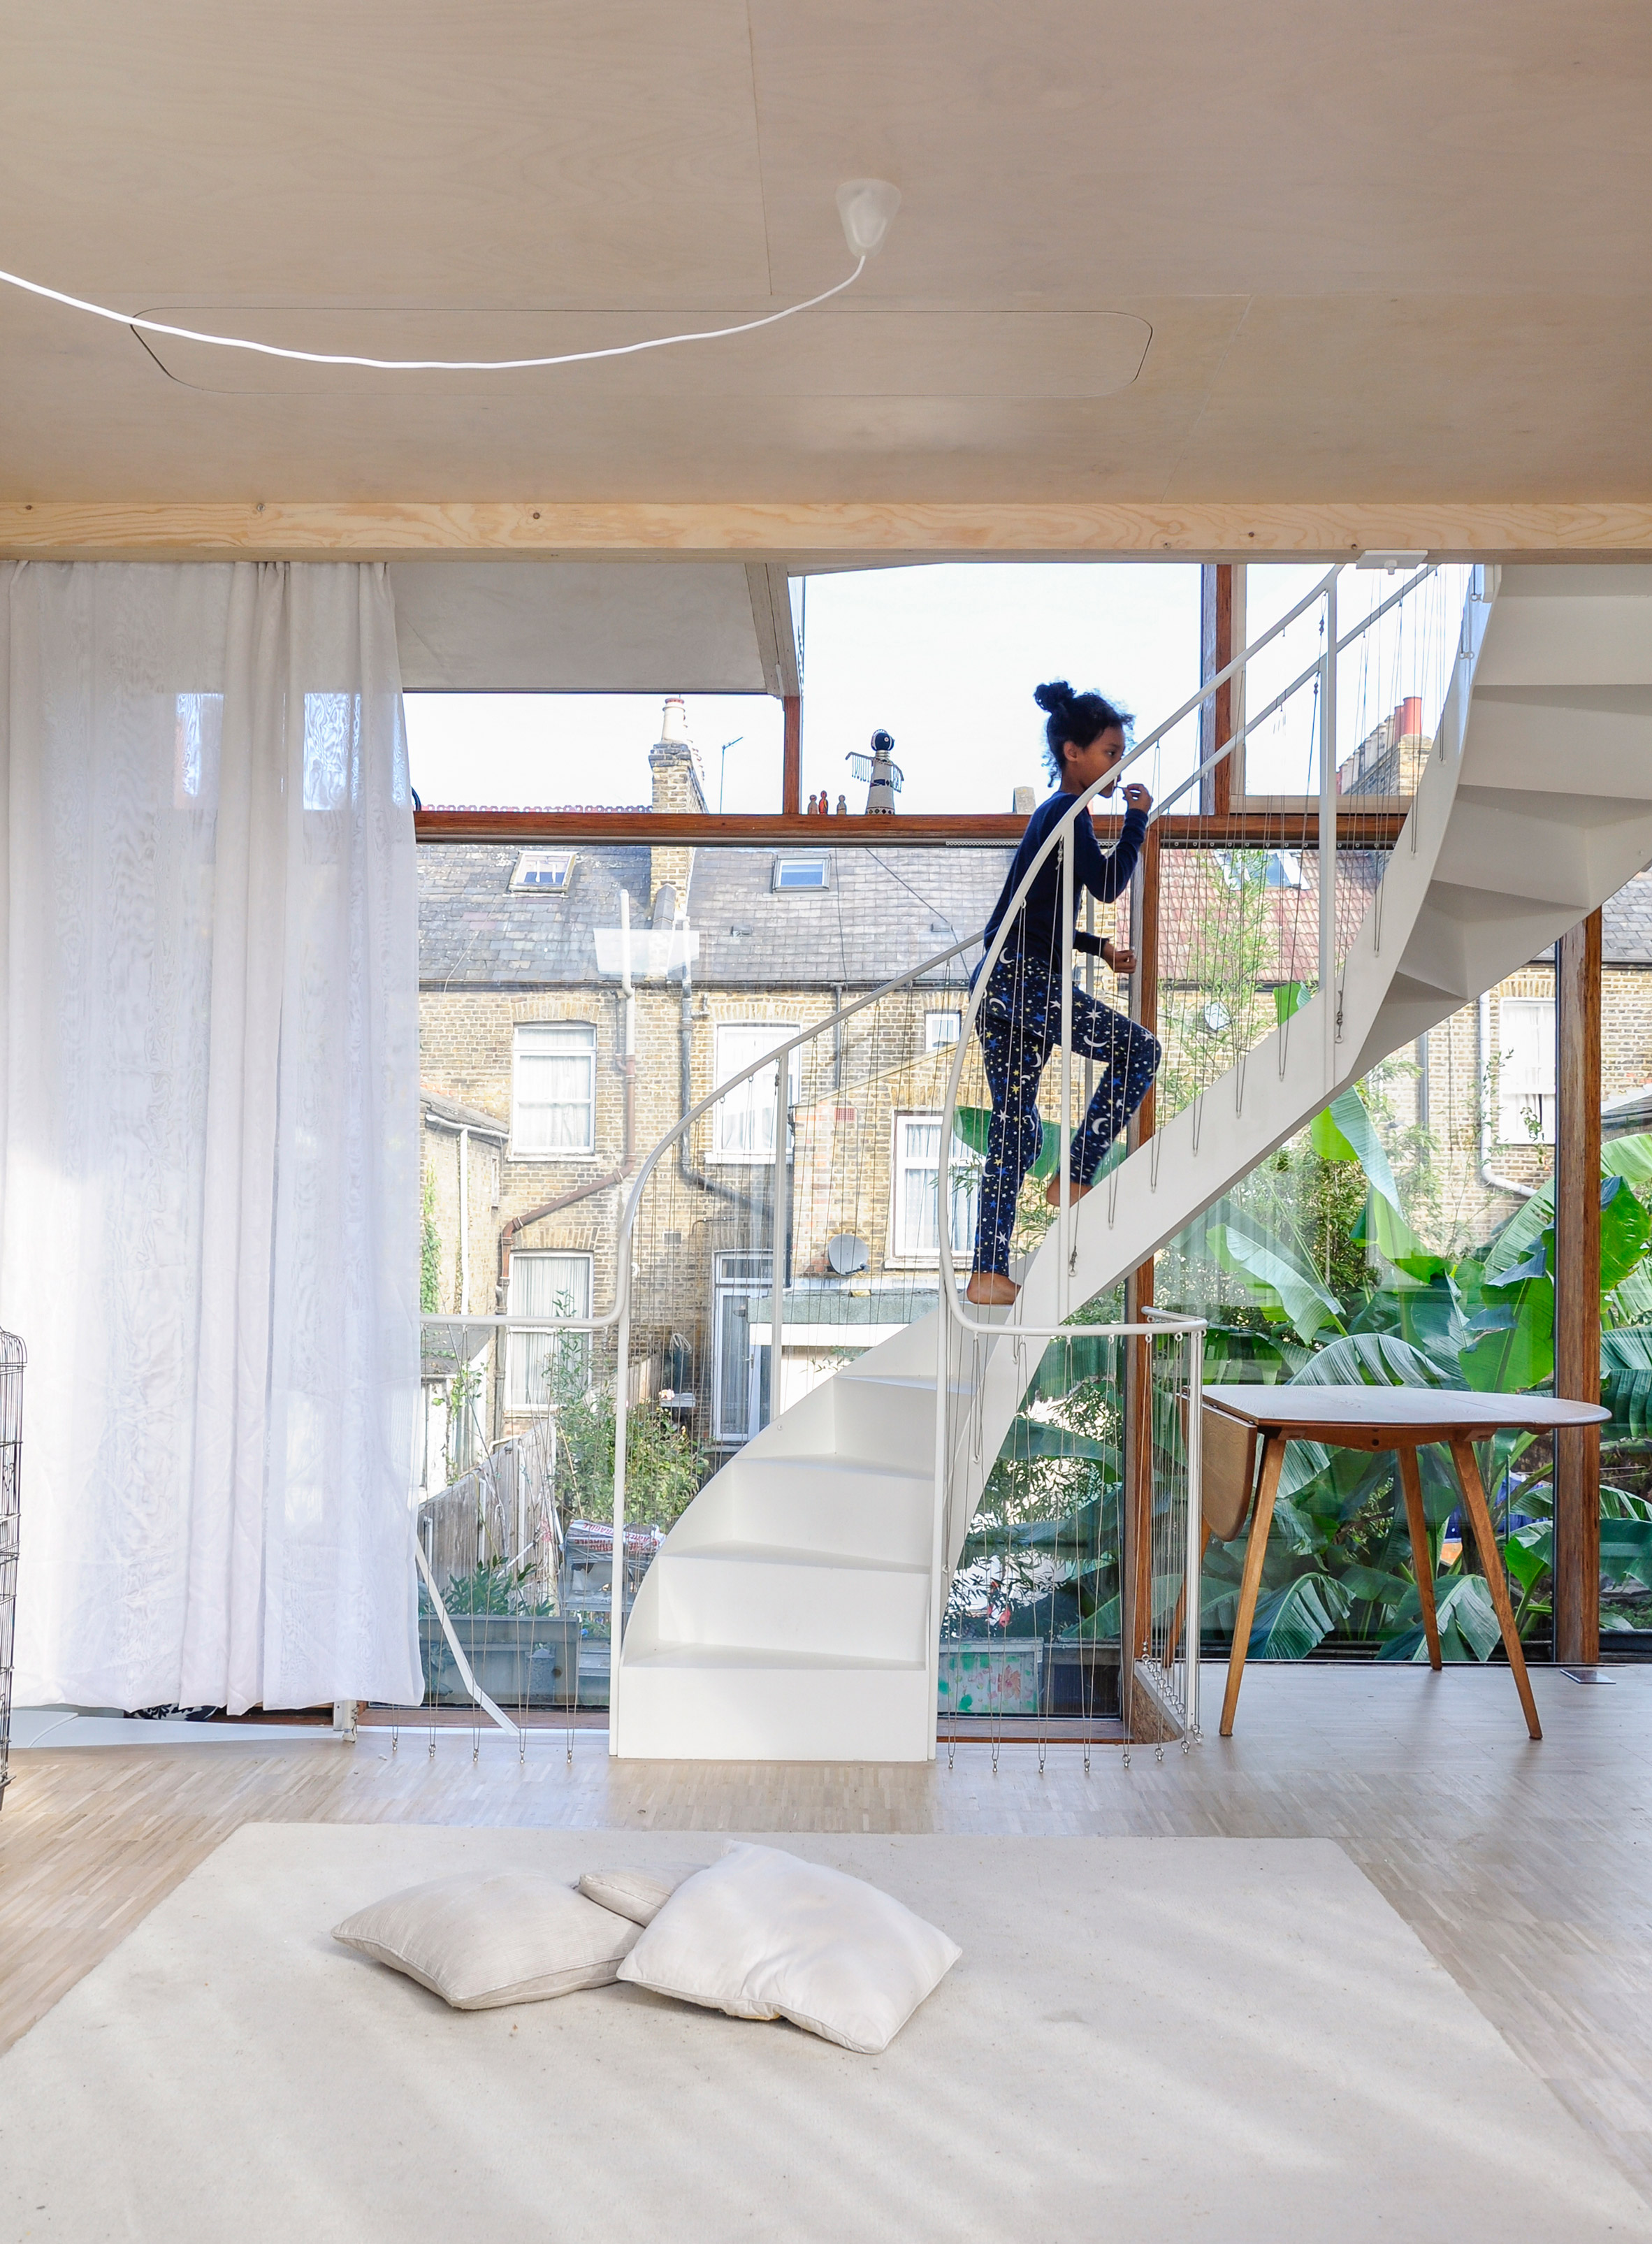 Three Rooms Under a New Roof by Ullmayer Sylvester in London